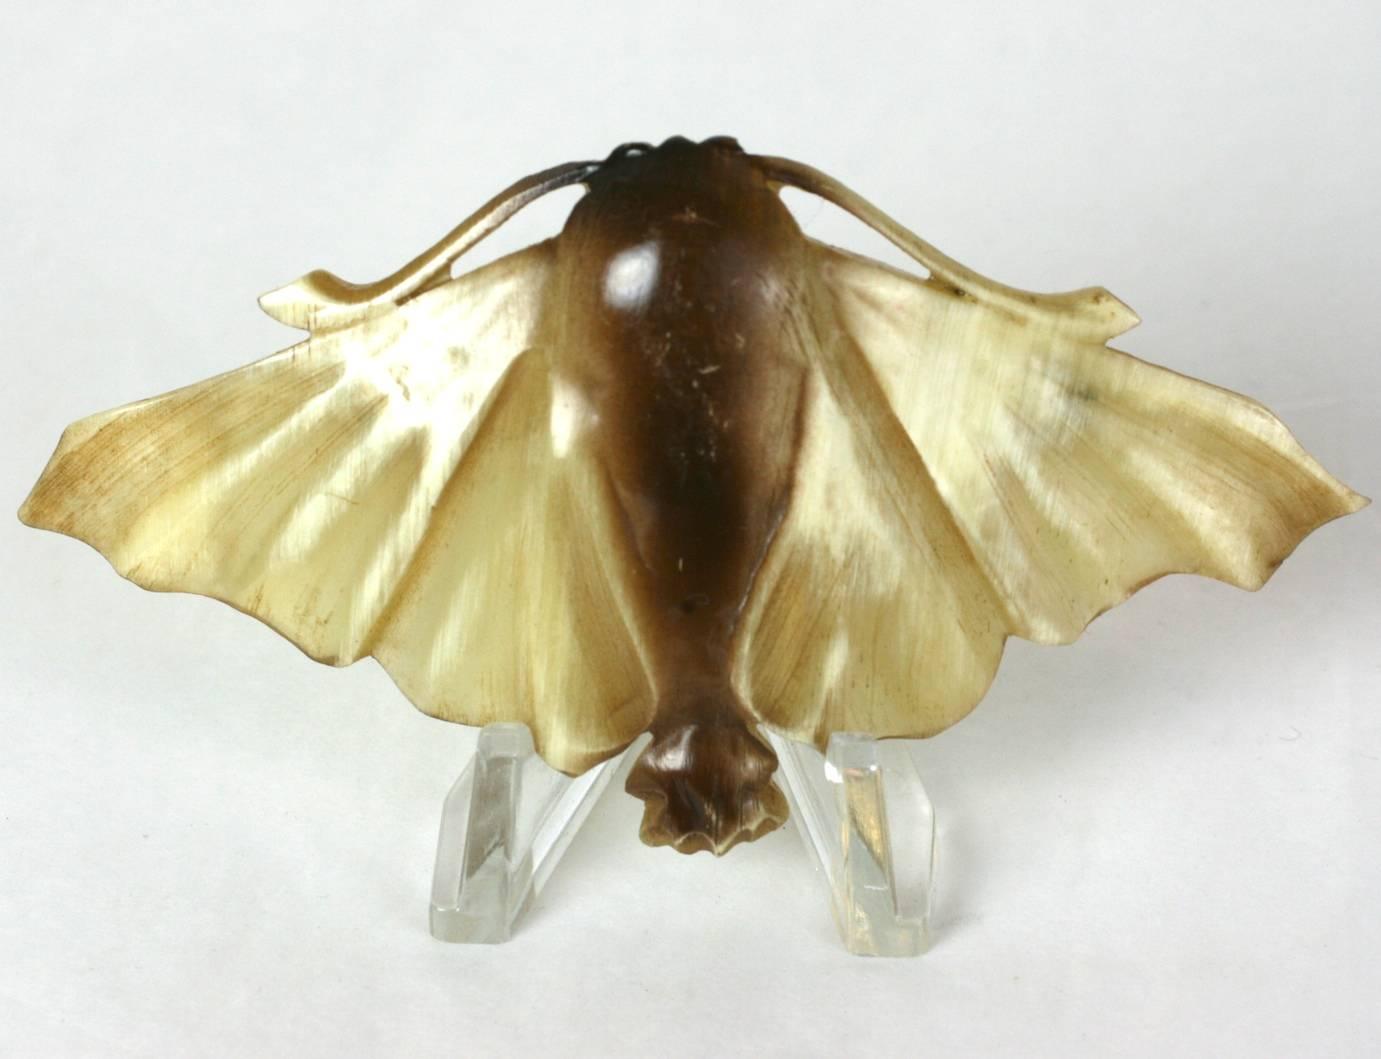 Large French Art Nouveau natural horn brooch, finely hand carved, depicting a large naturalistic night moth. The iridescence in the natural horn allows this to become the perfect material to bring this design to life. Hand carved with amazing